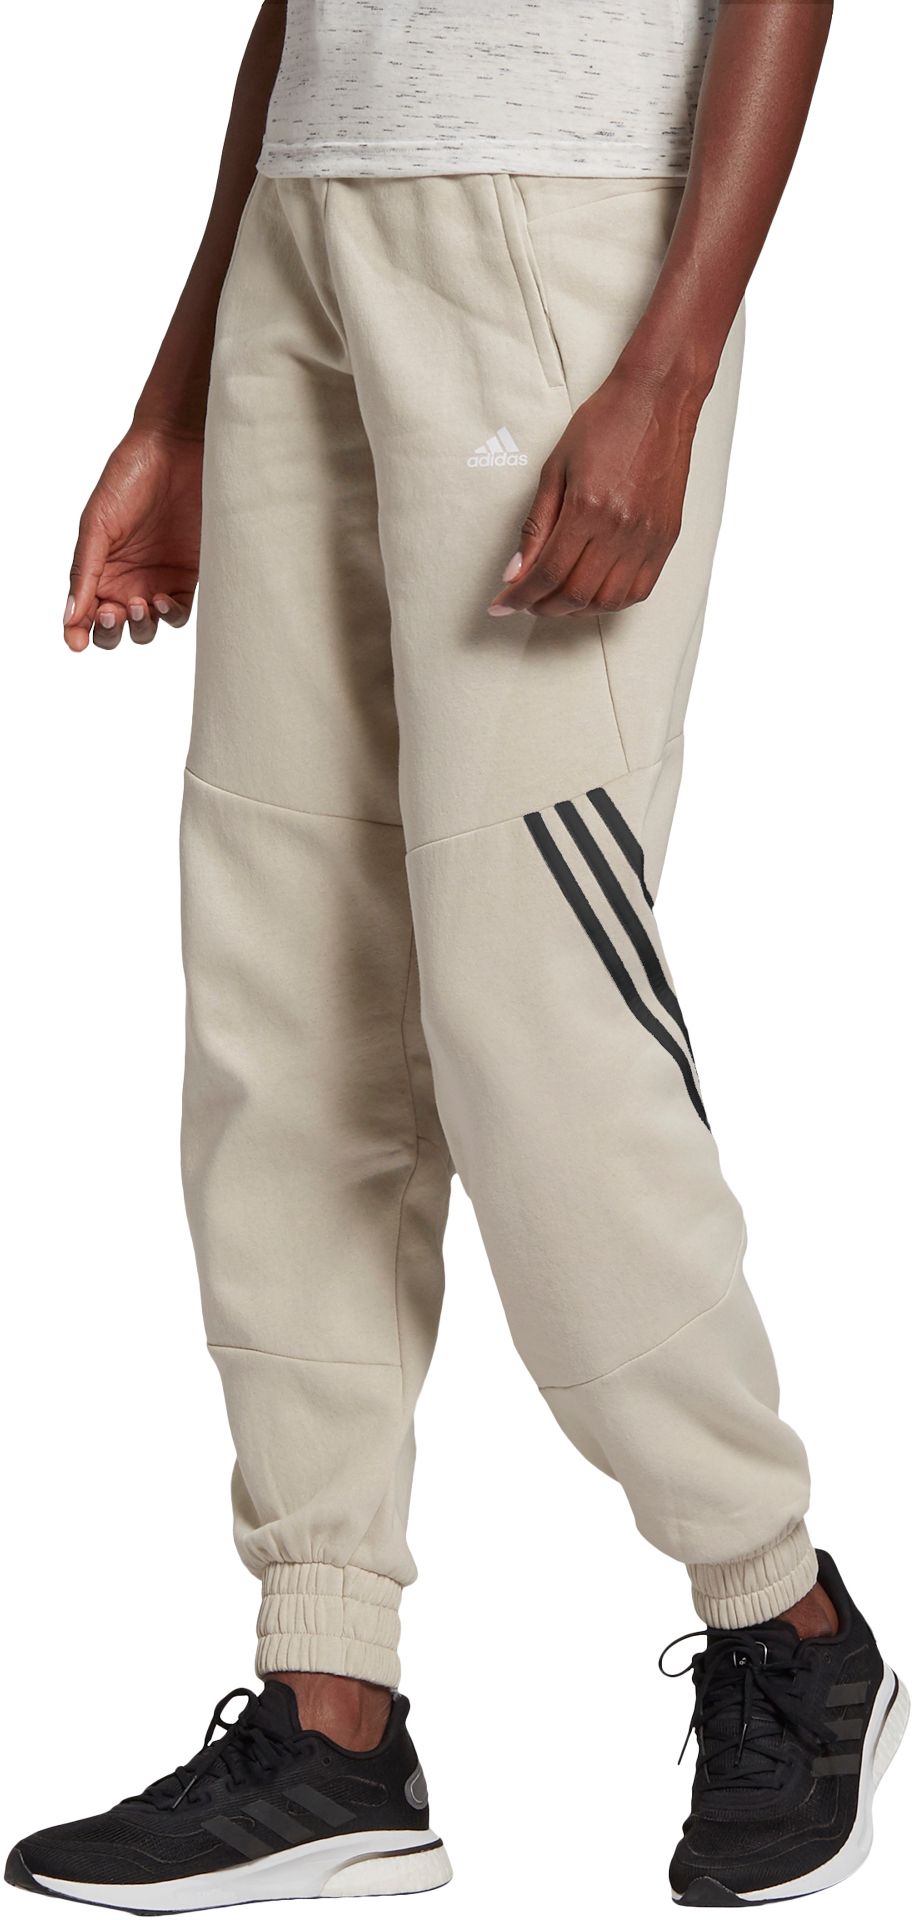 adidas joggers for sale